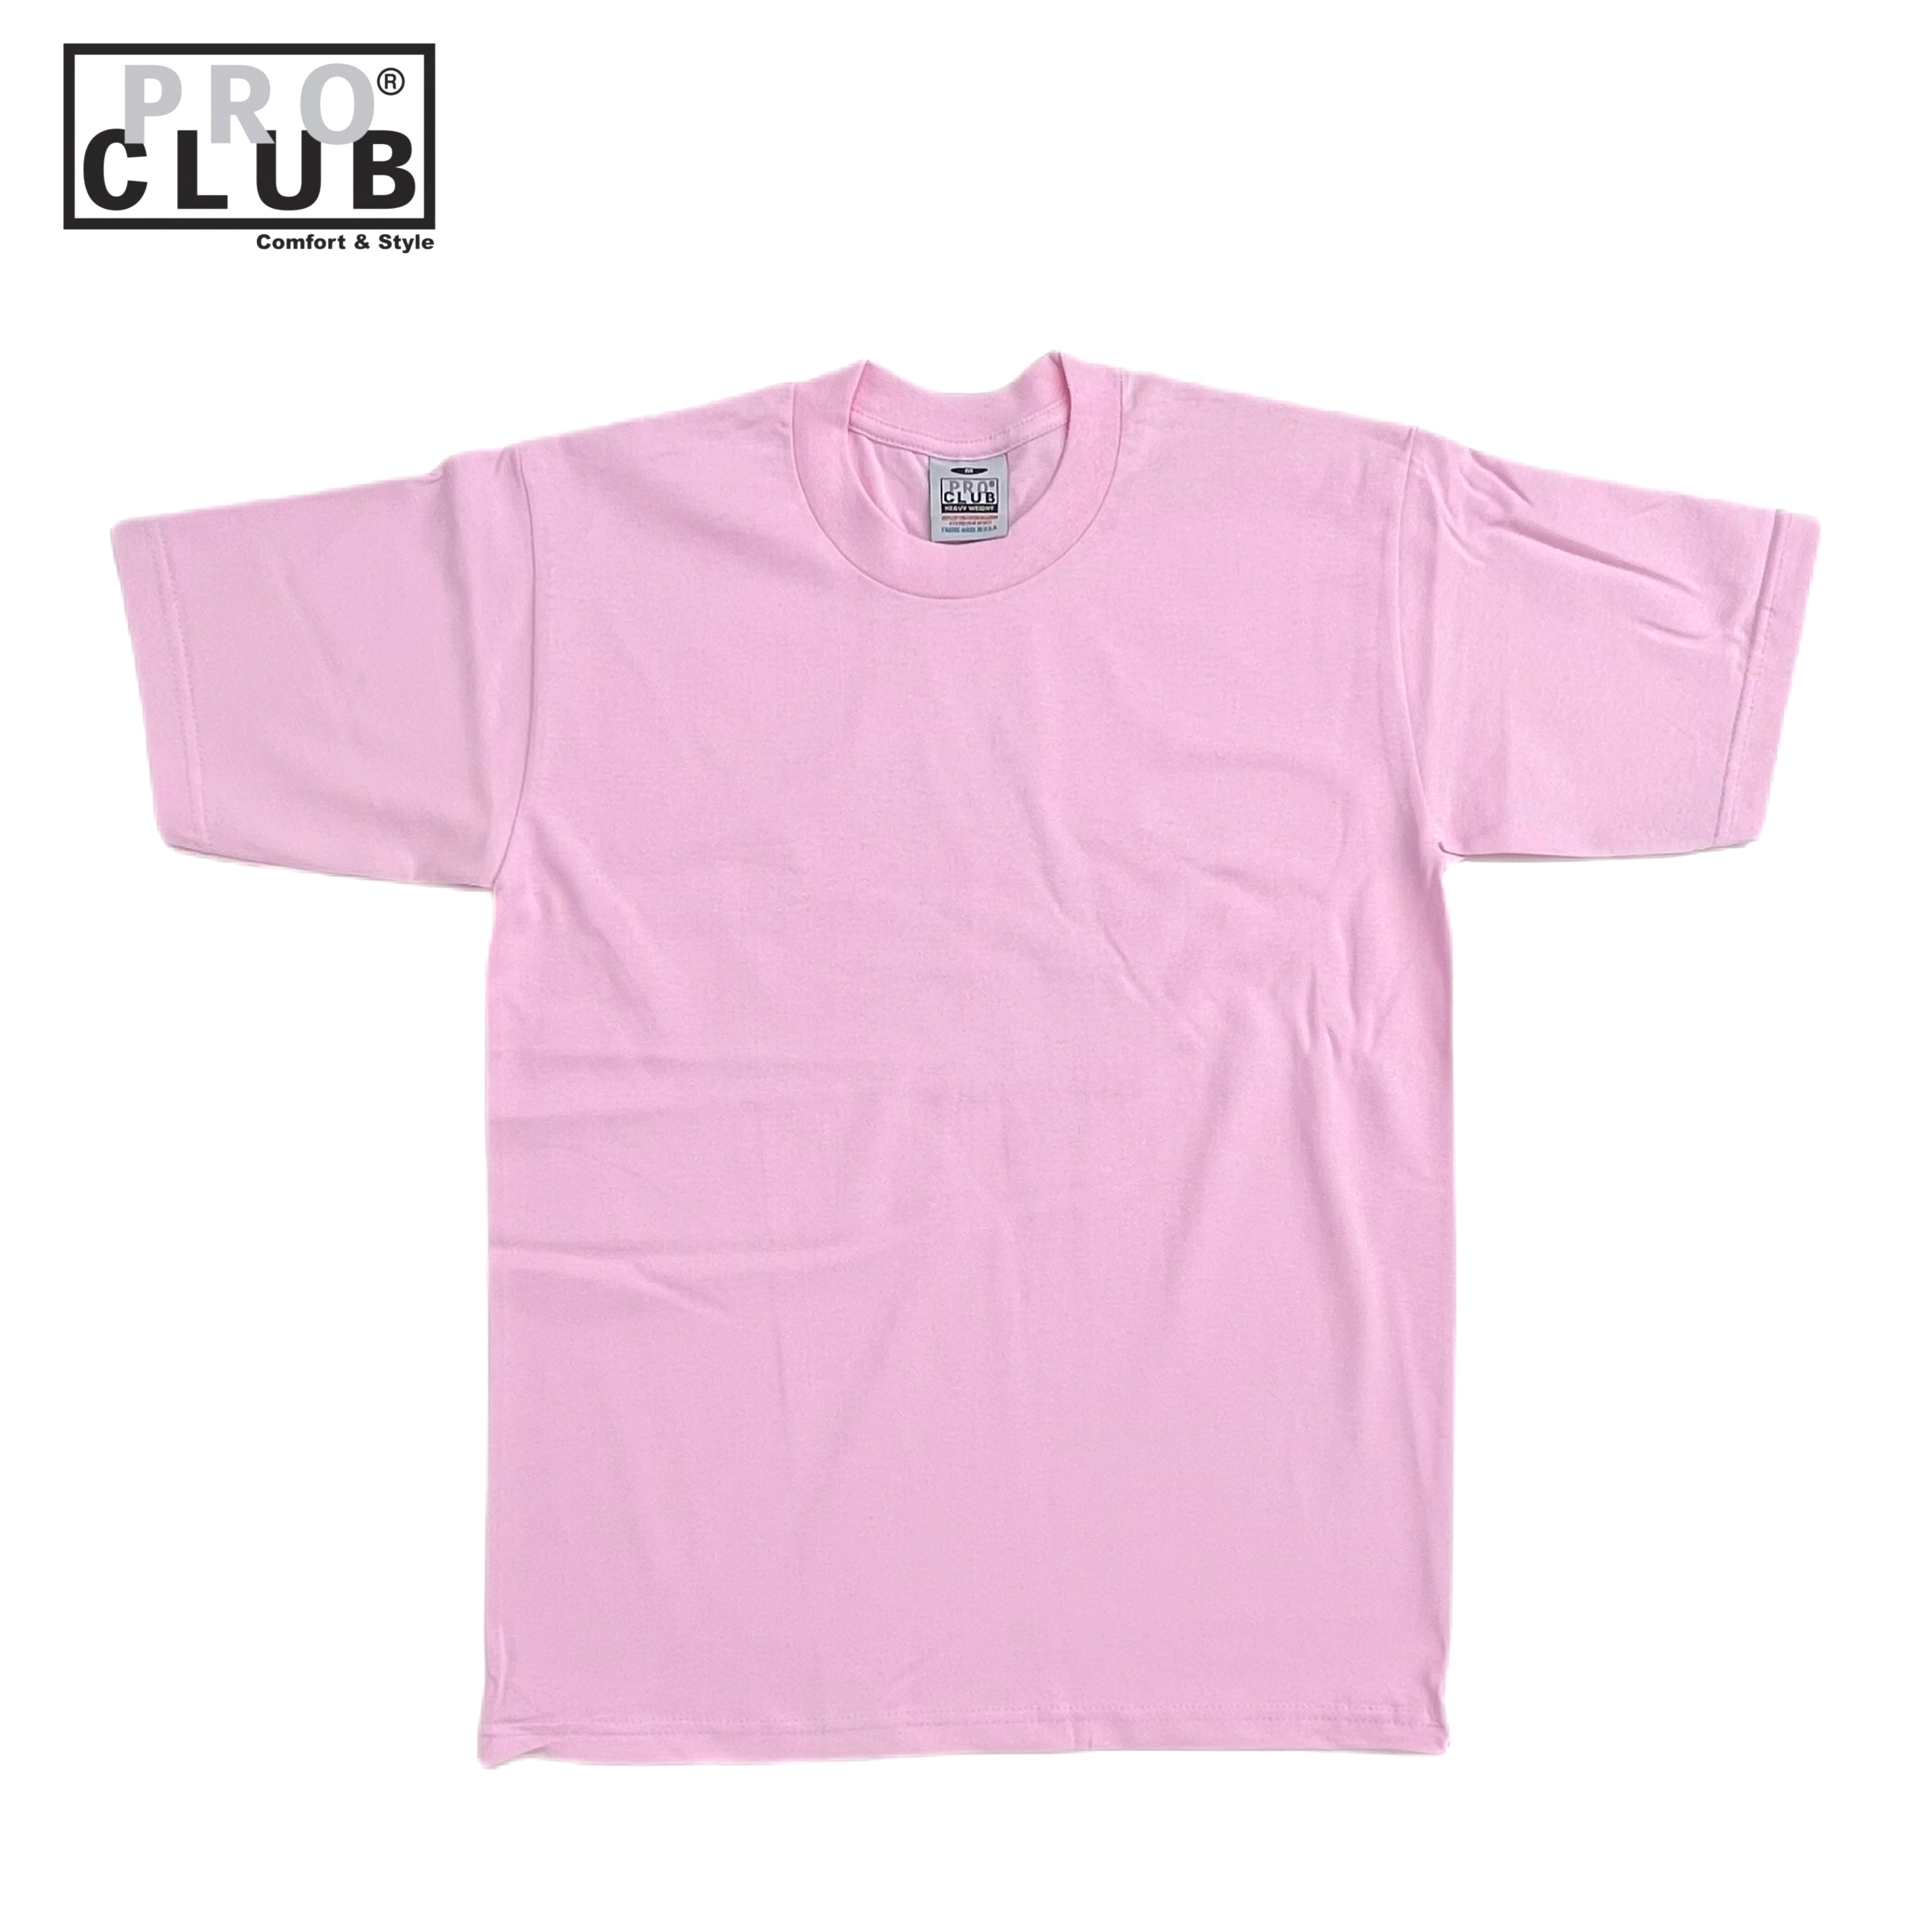 Styling Pro Club T-Shirts for Casual Occasions